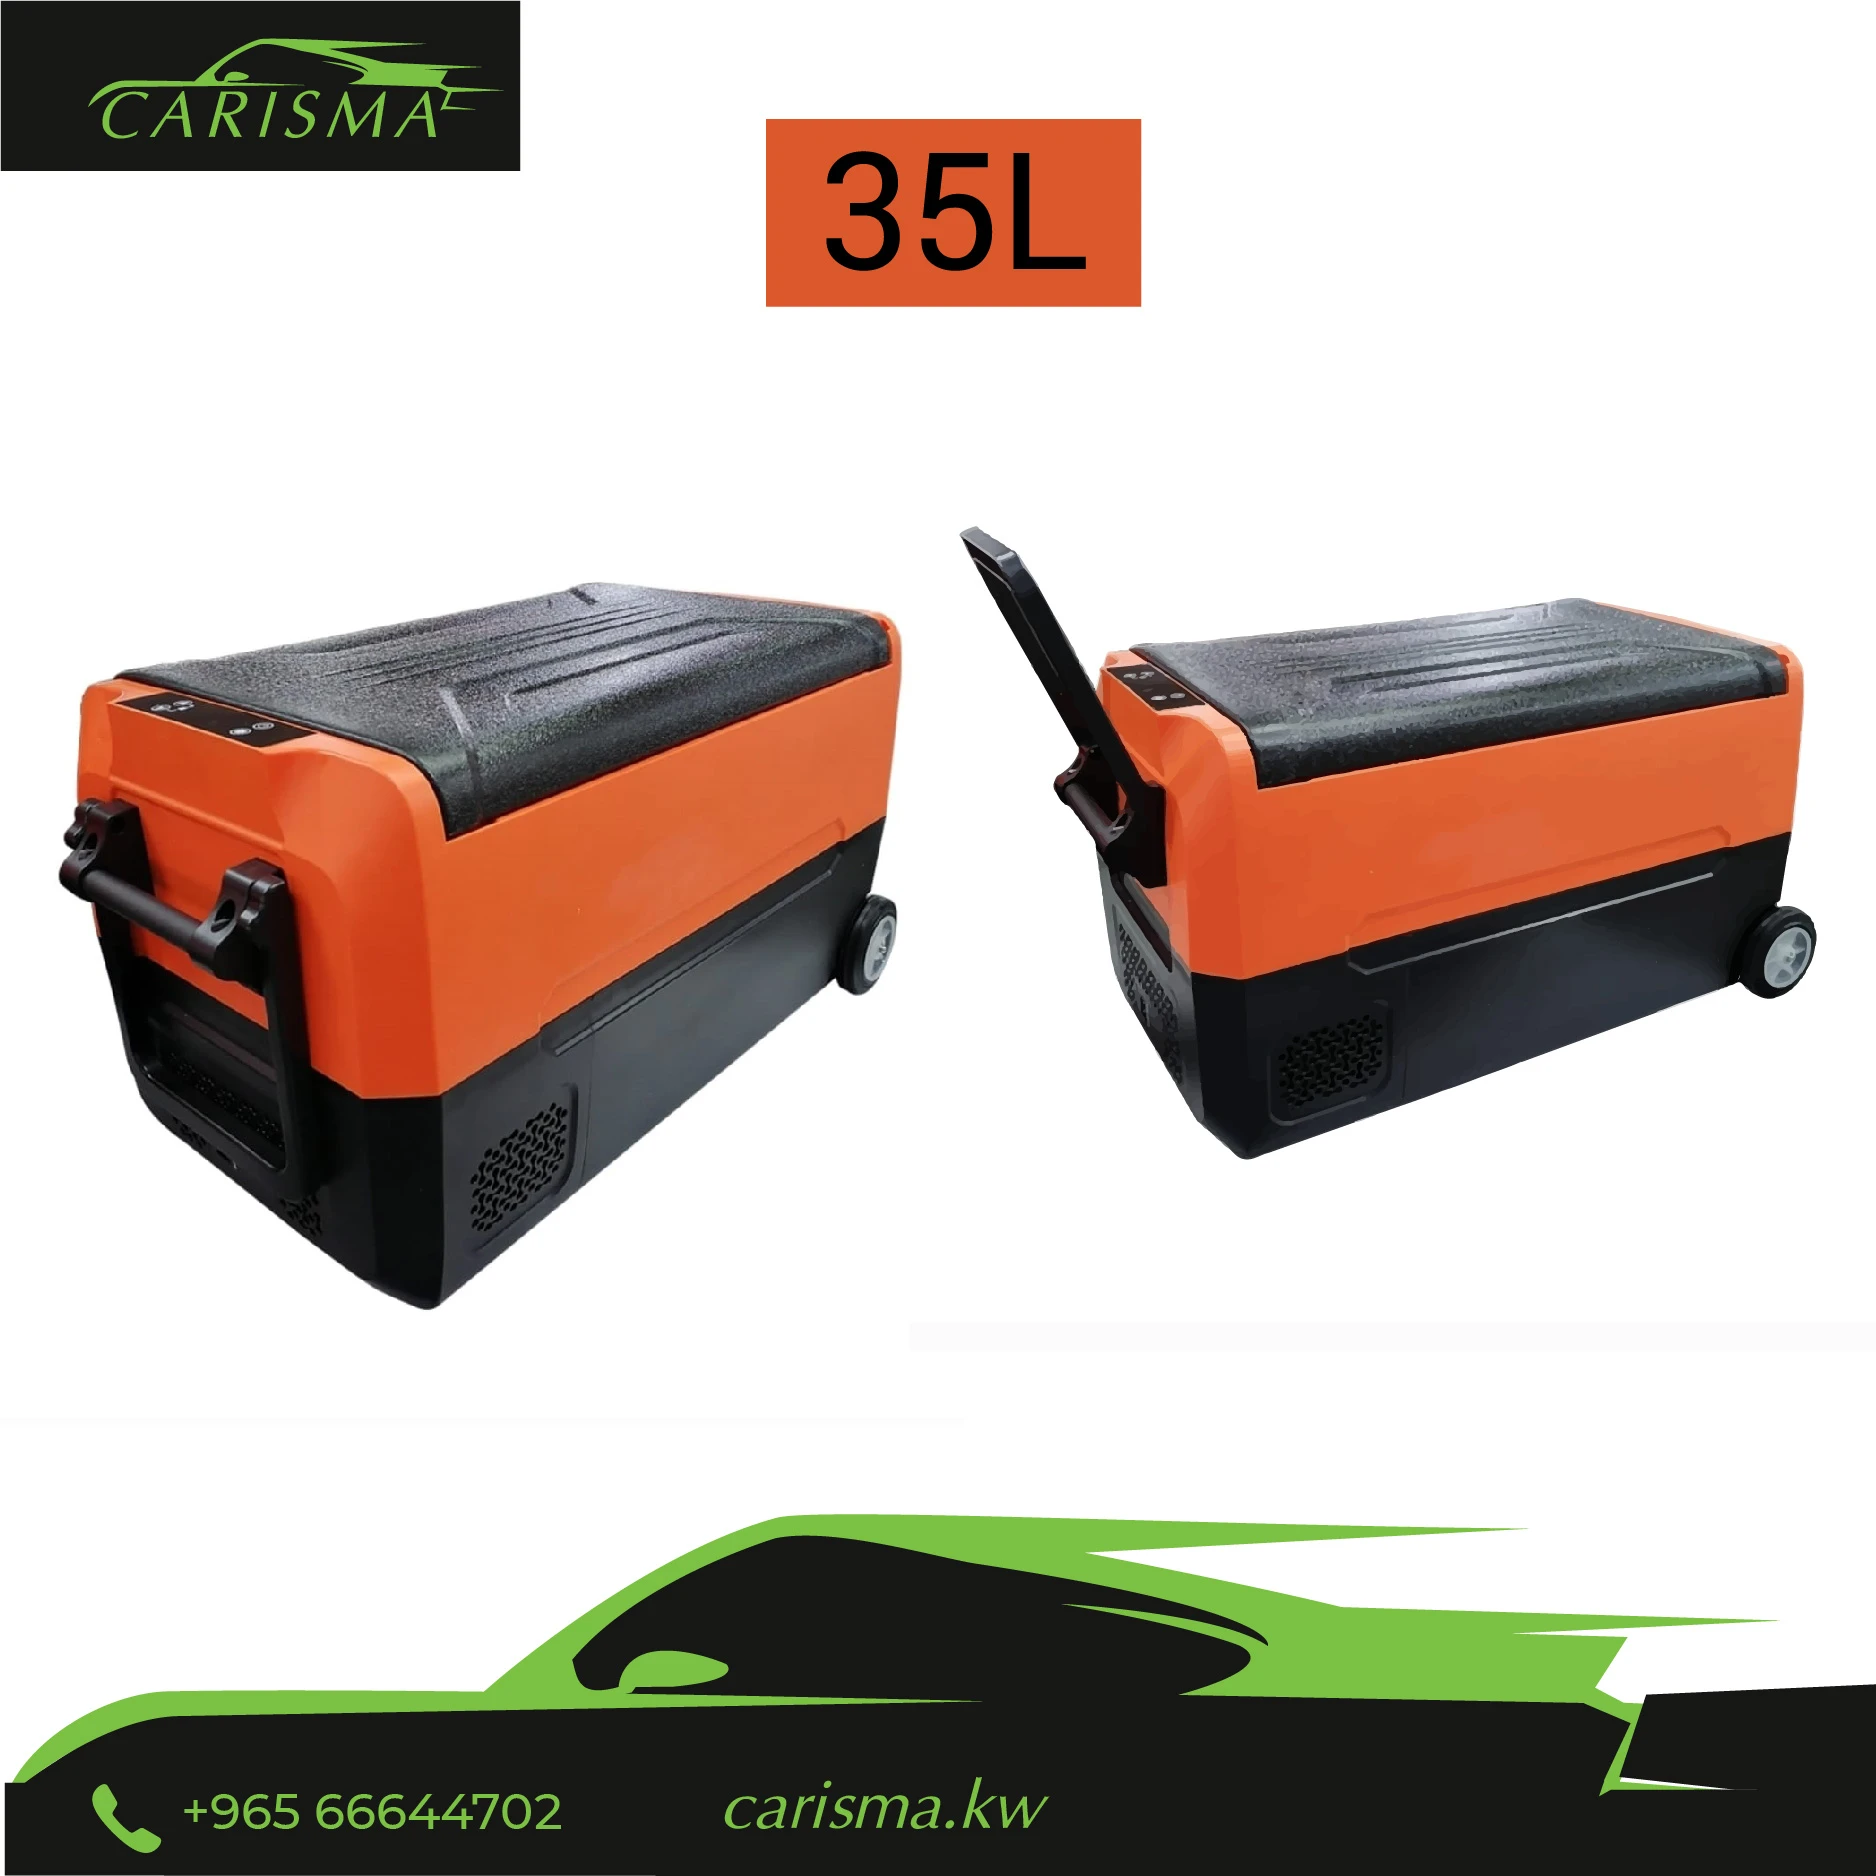 35L Refrigerator for Car and Home